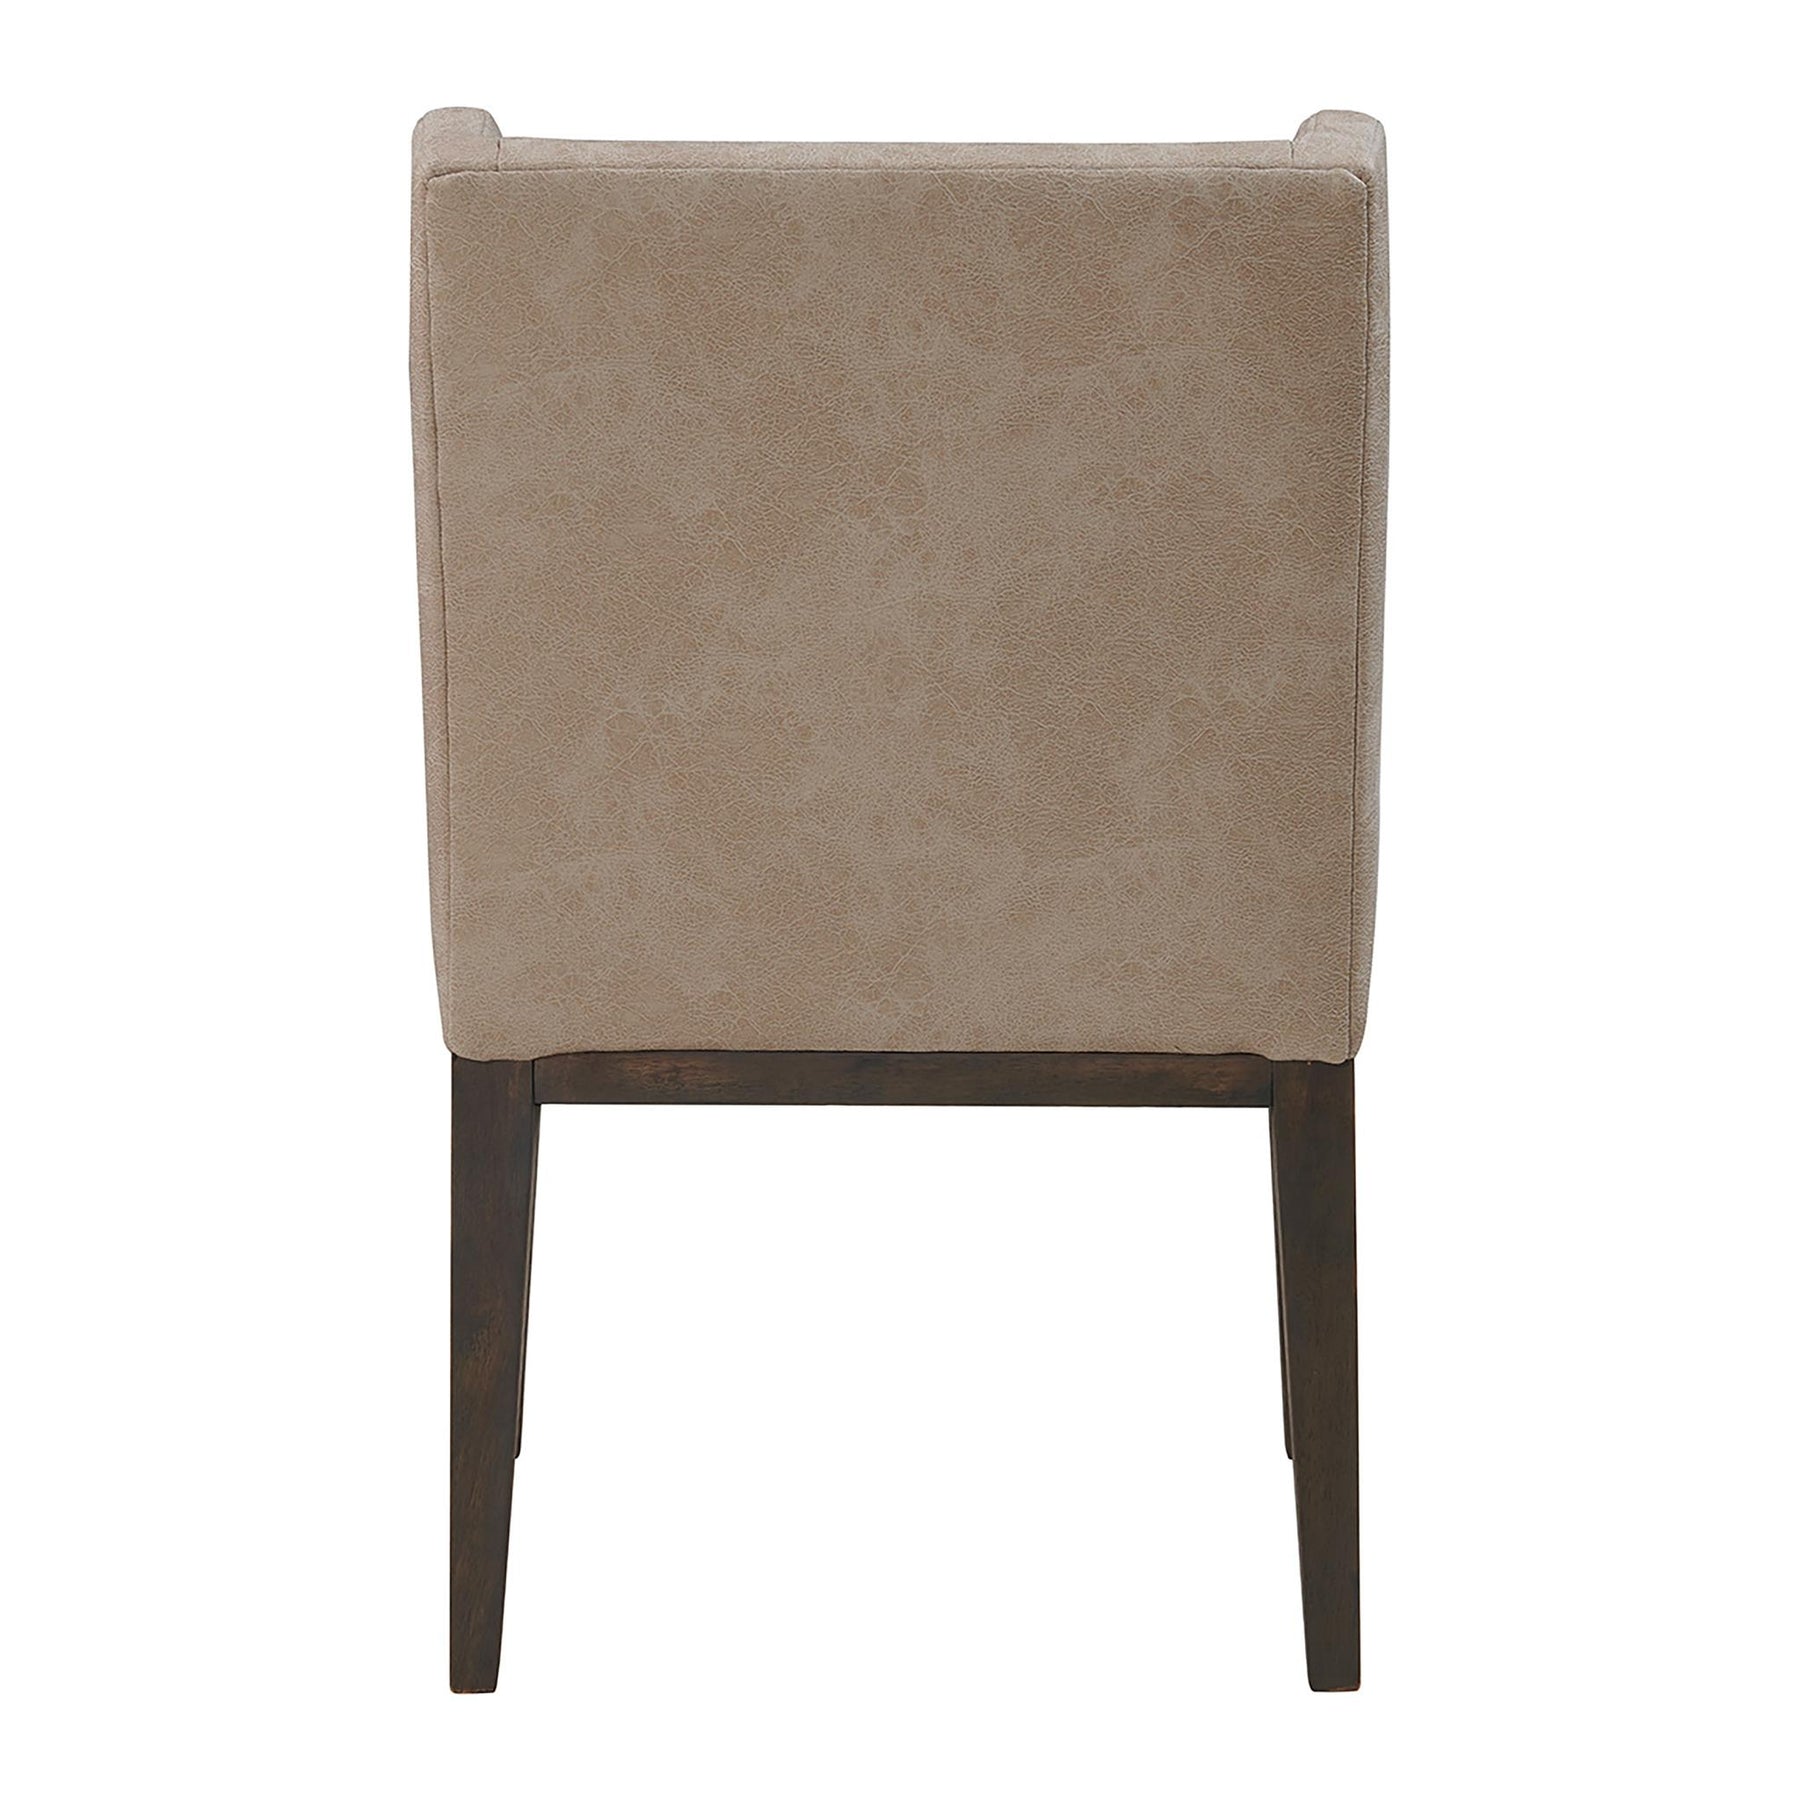 Ethan PU Leather Dining Chair by New Pacific Direct - 9900034